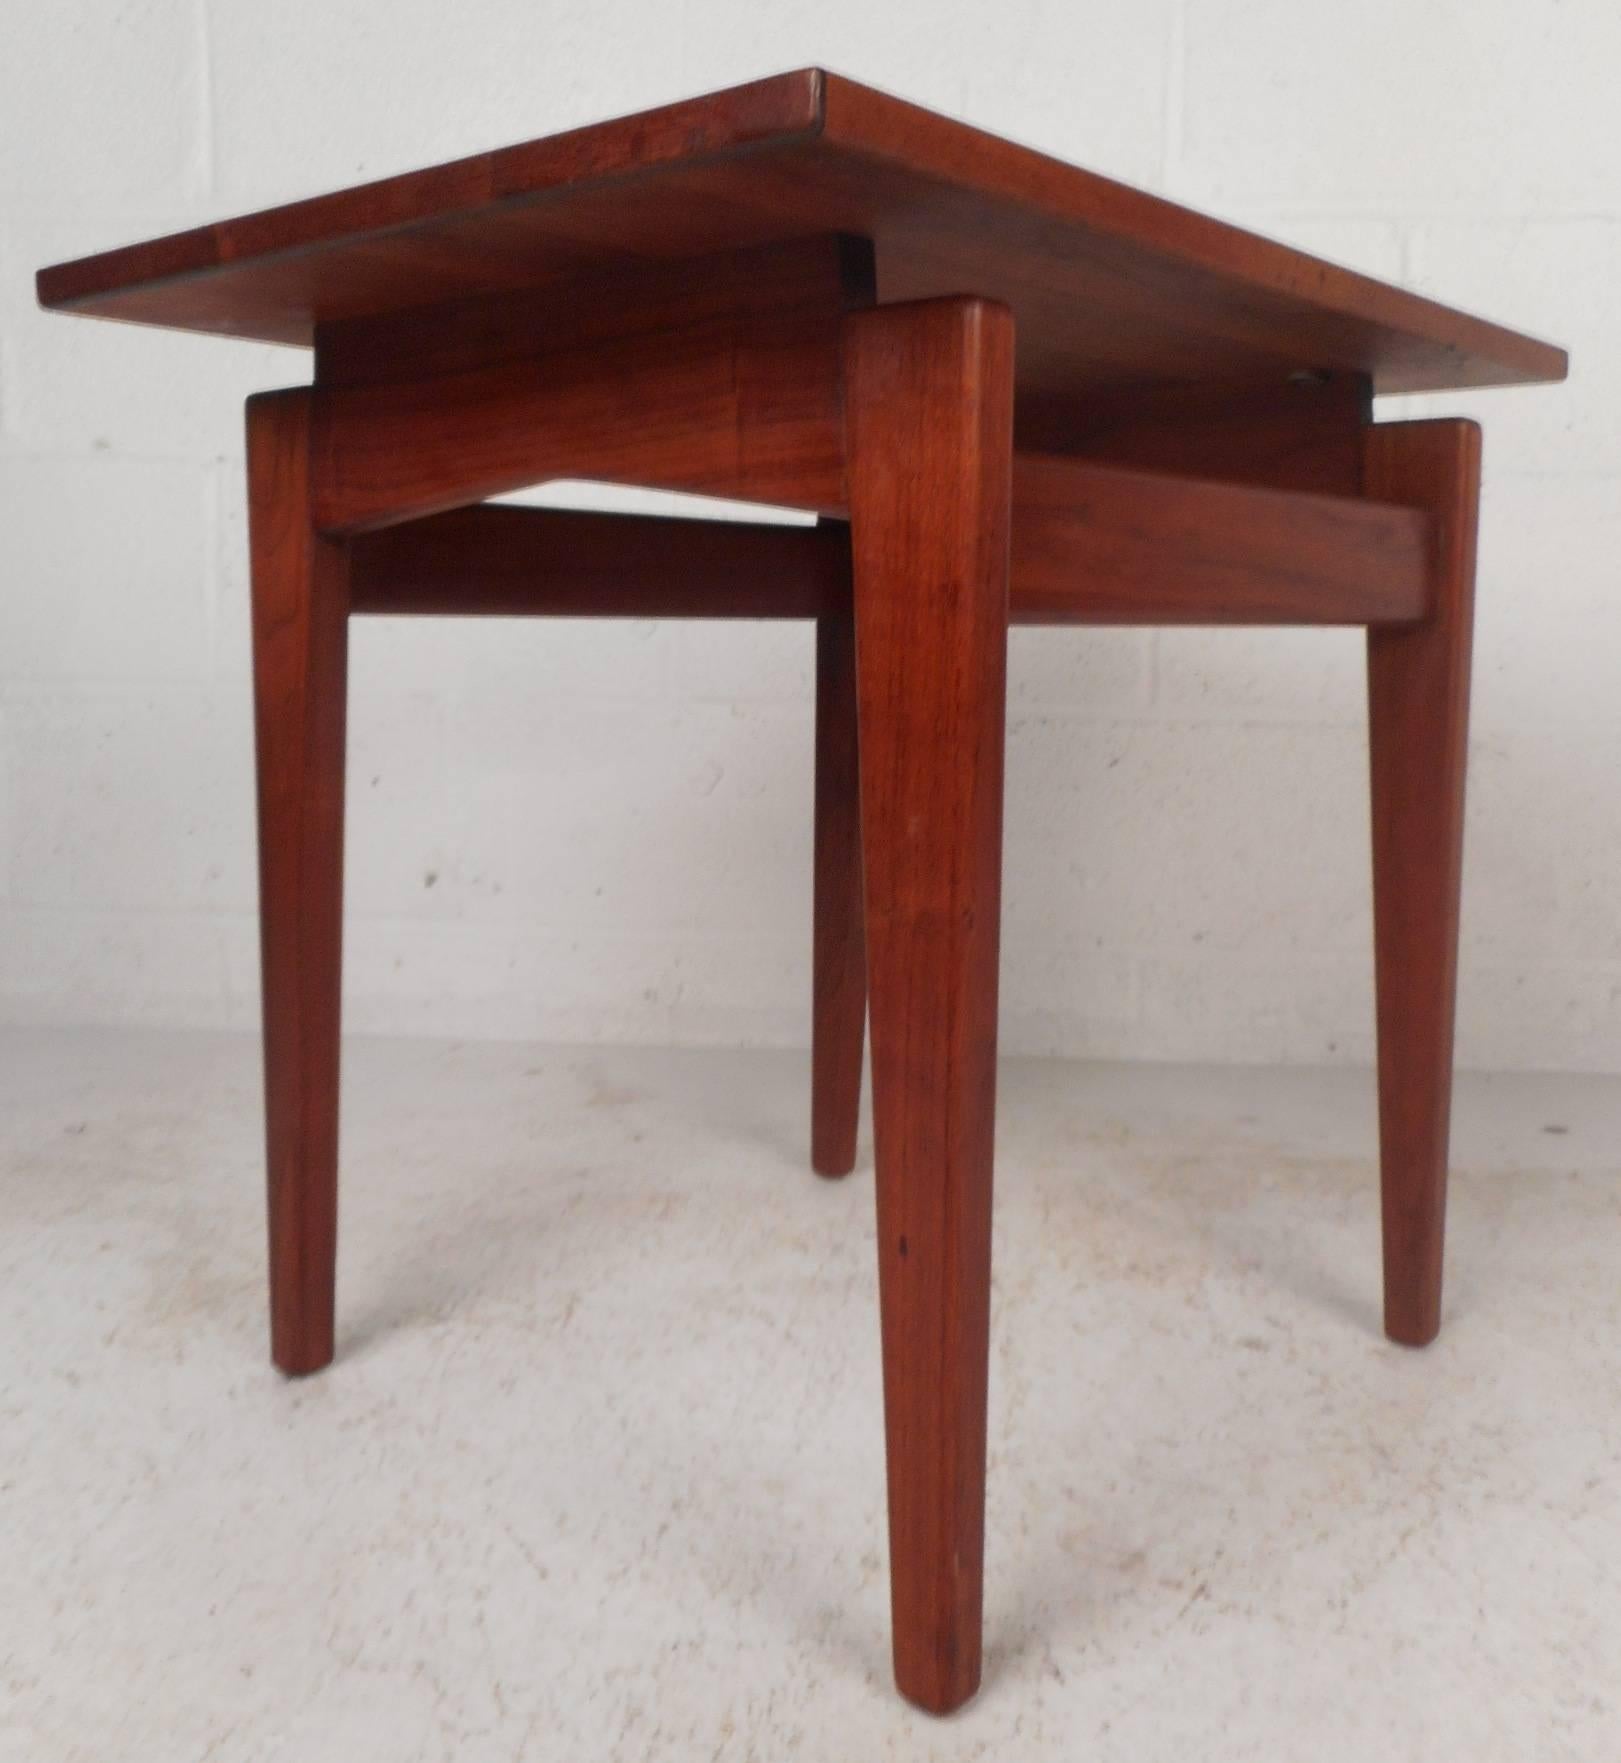 This beautiful vintage modern end table features a stylish floating top design. Solid walnut table with elegant wood grain and tapered legs. This unique Mid-Century side table makes the perfect addition to any modern interior. Please confirm item